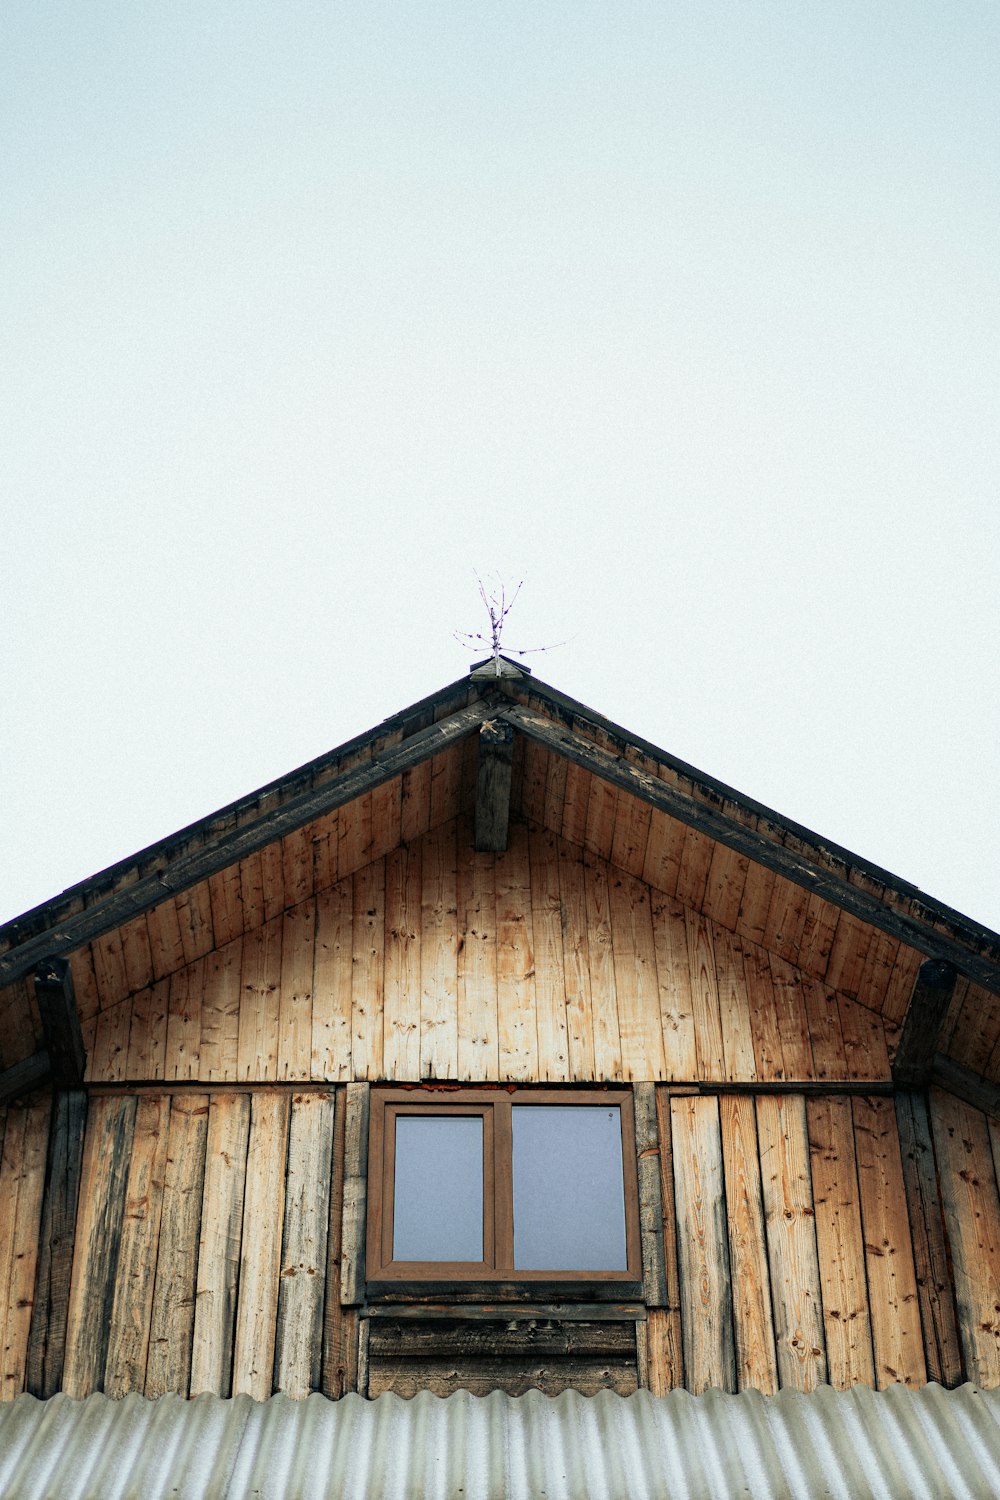 a wooden building with a metal roof and a window